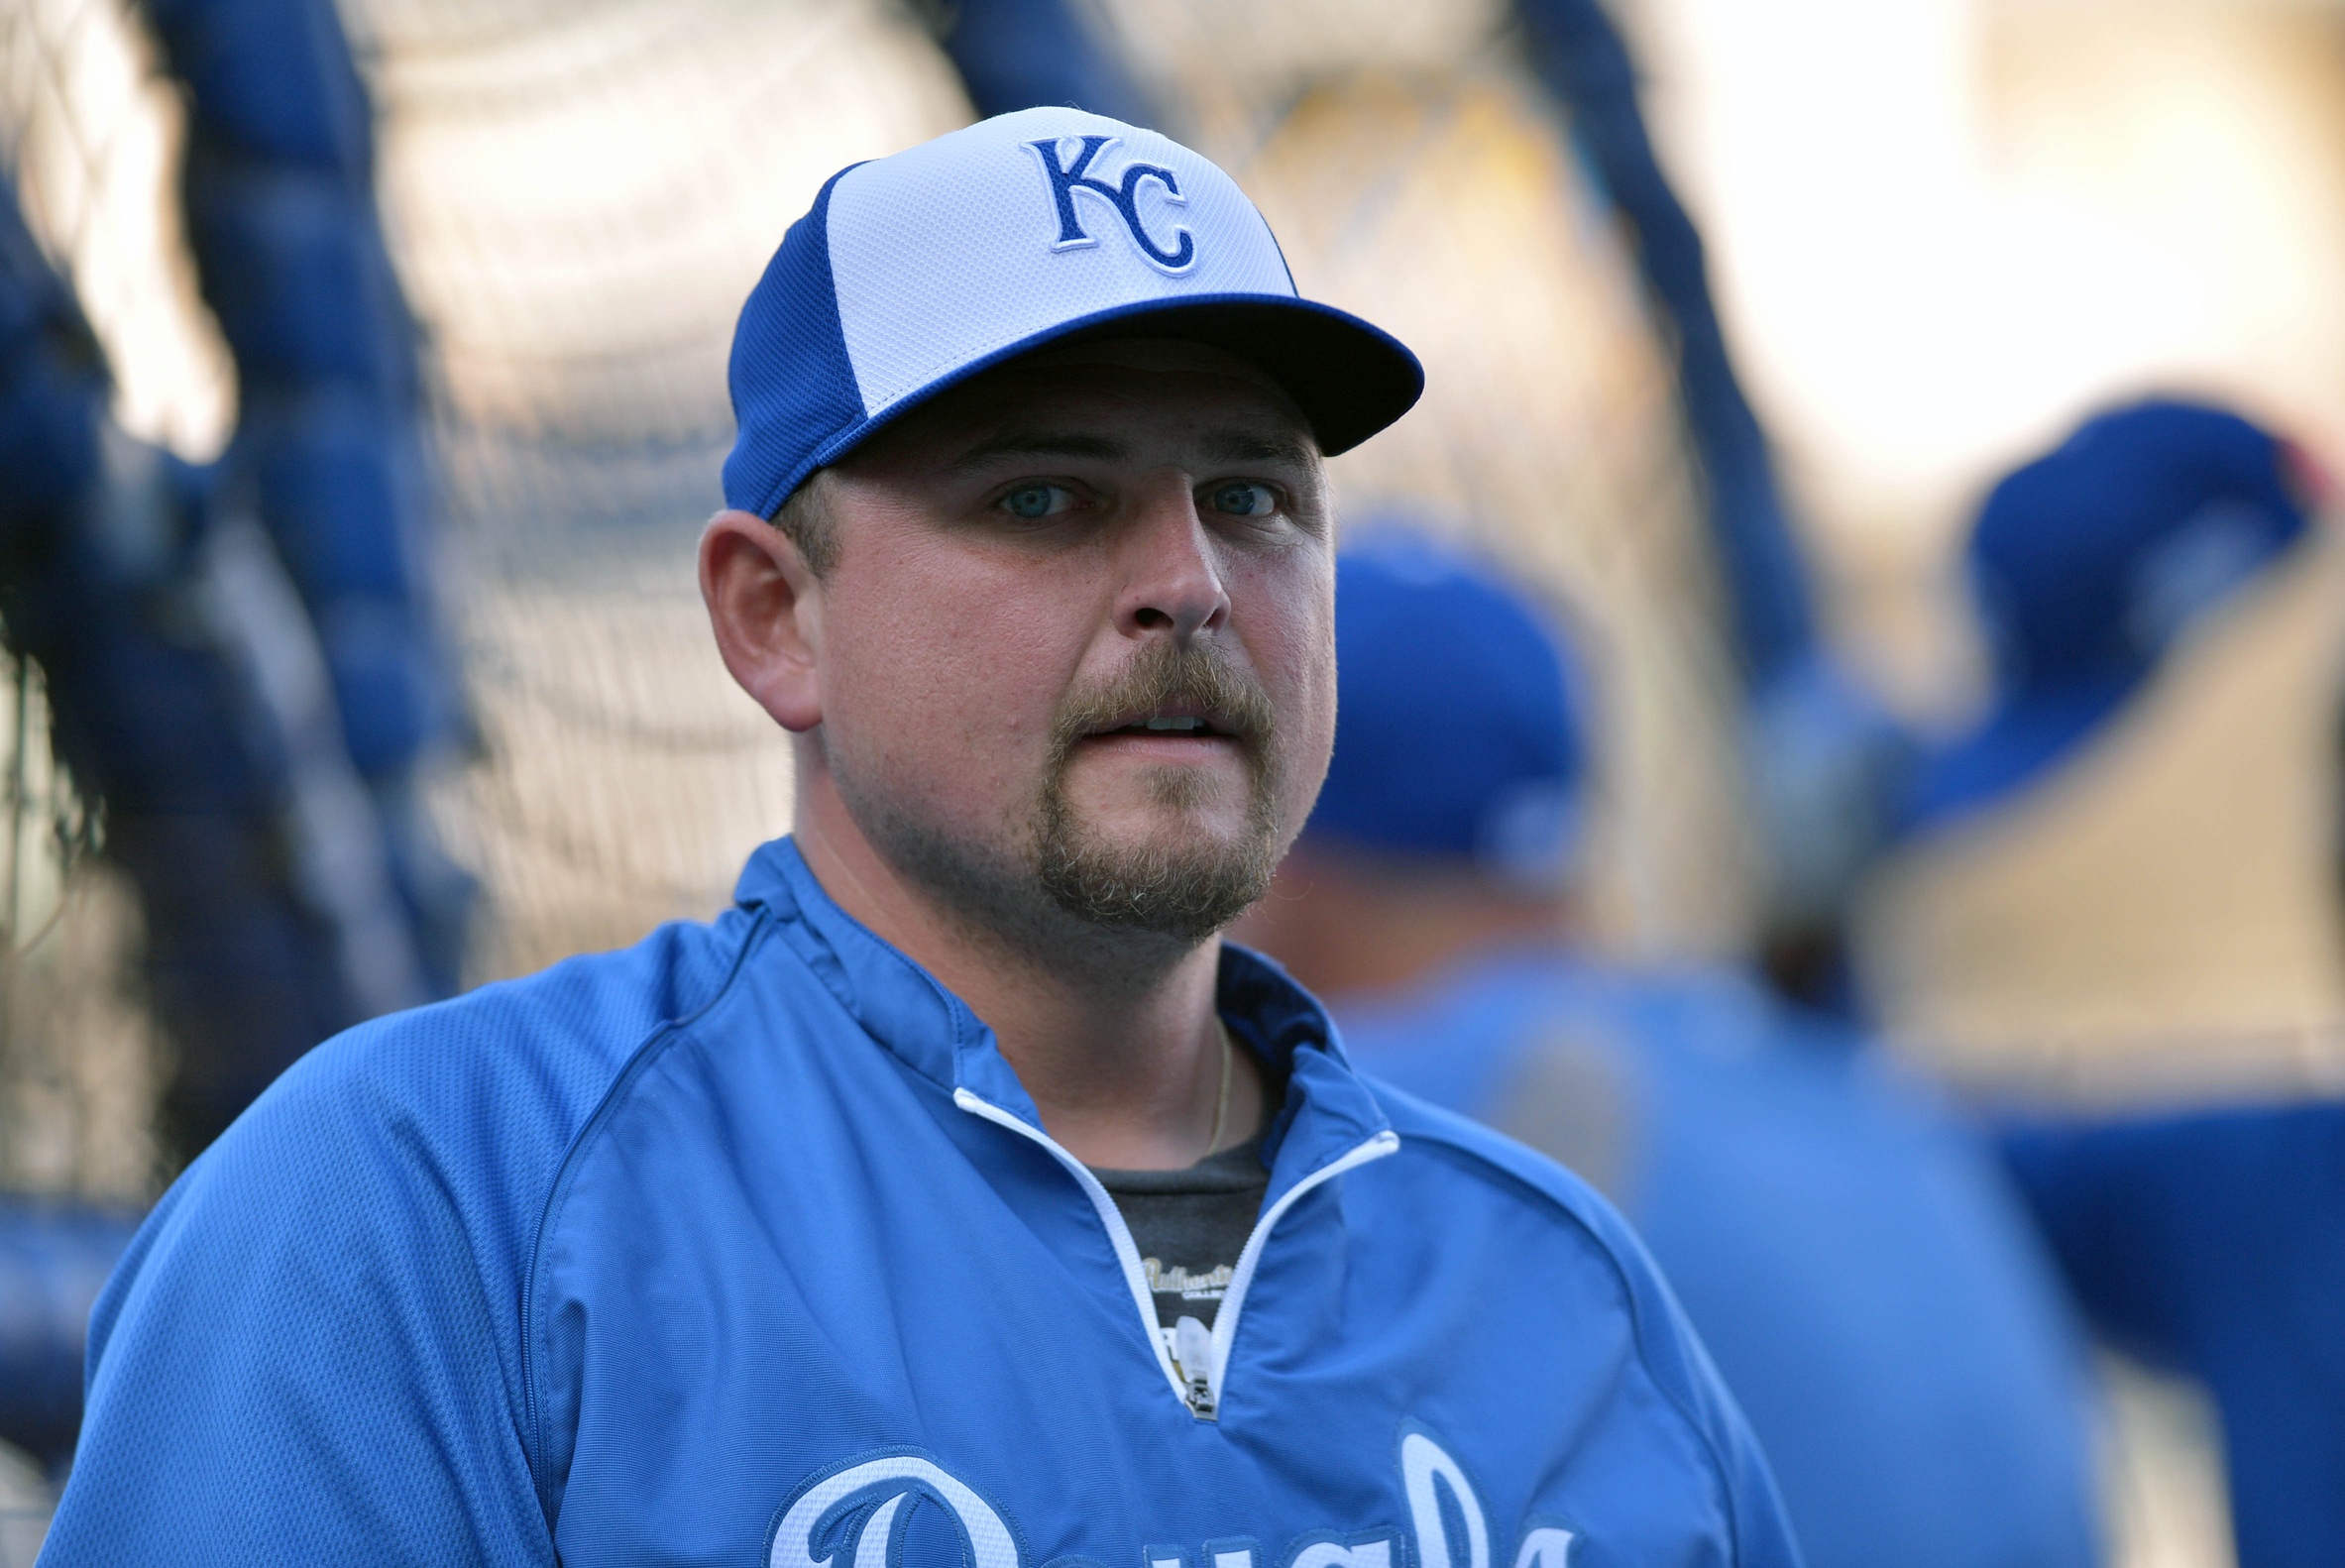 Slow-footed Royals DH Billy Butler stole a base in a postseason game